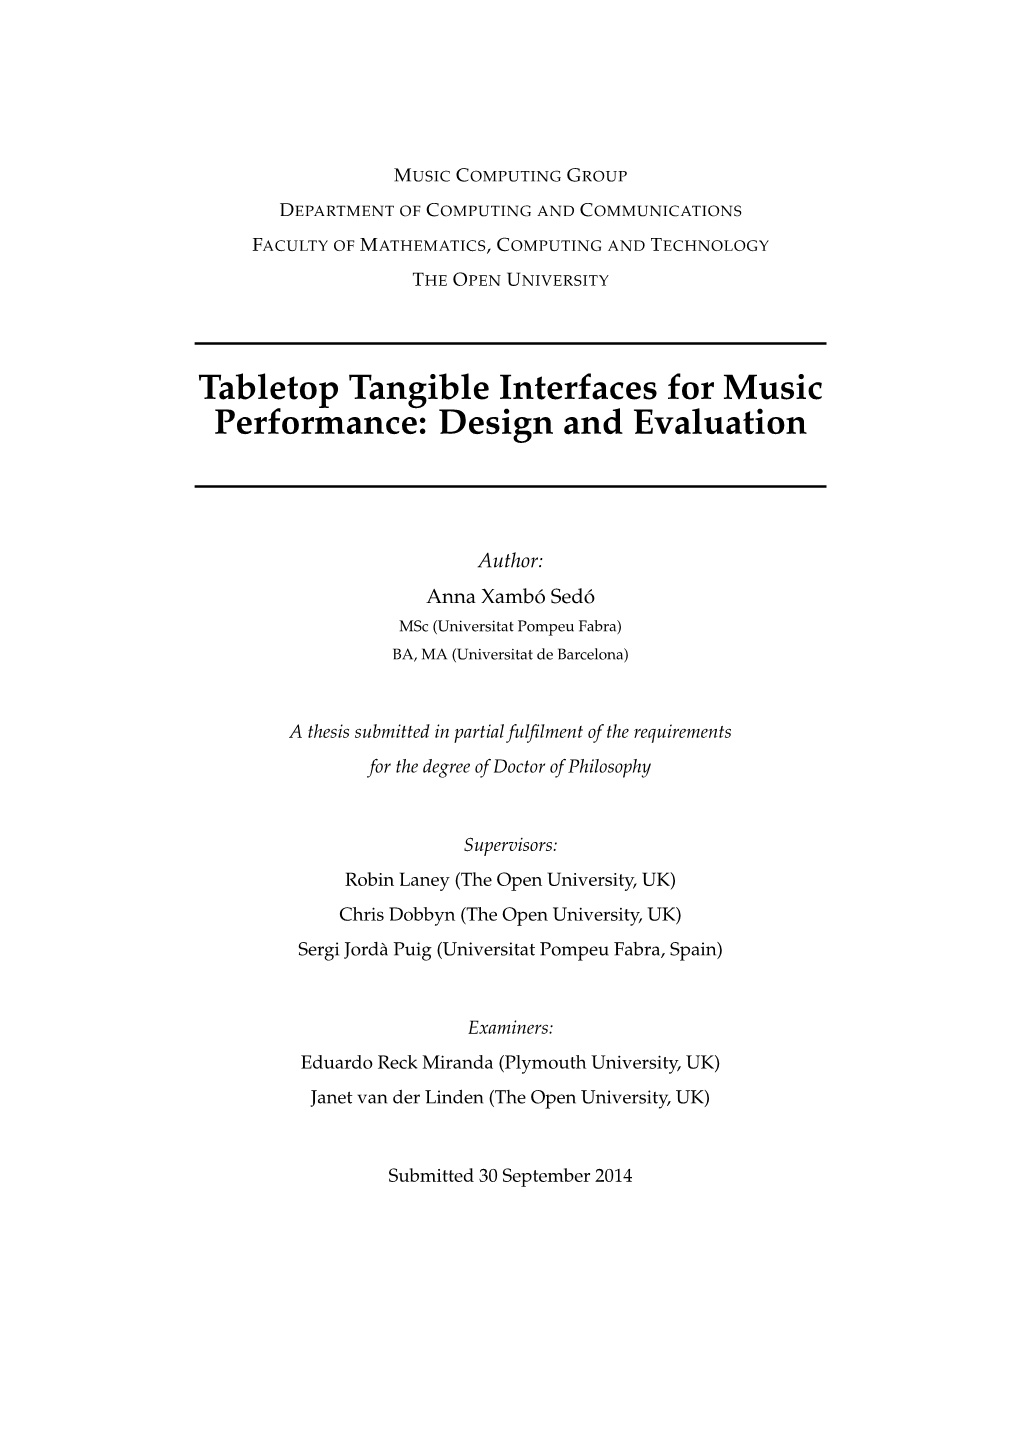 Tabletop Tangible Interfaces for Music Performance: Design and Evaluation